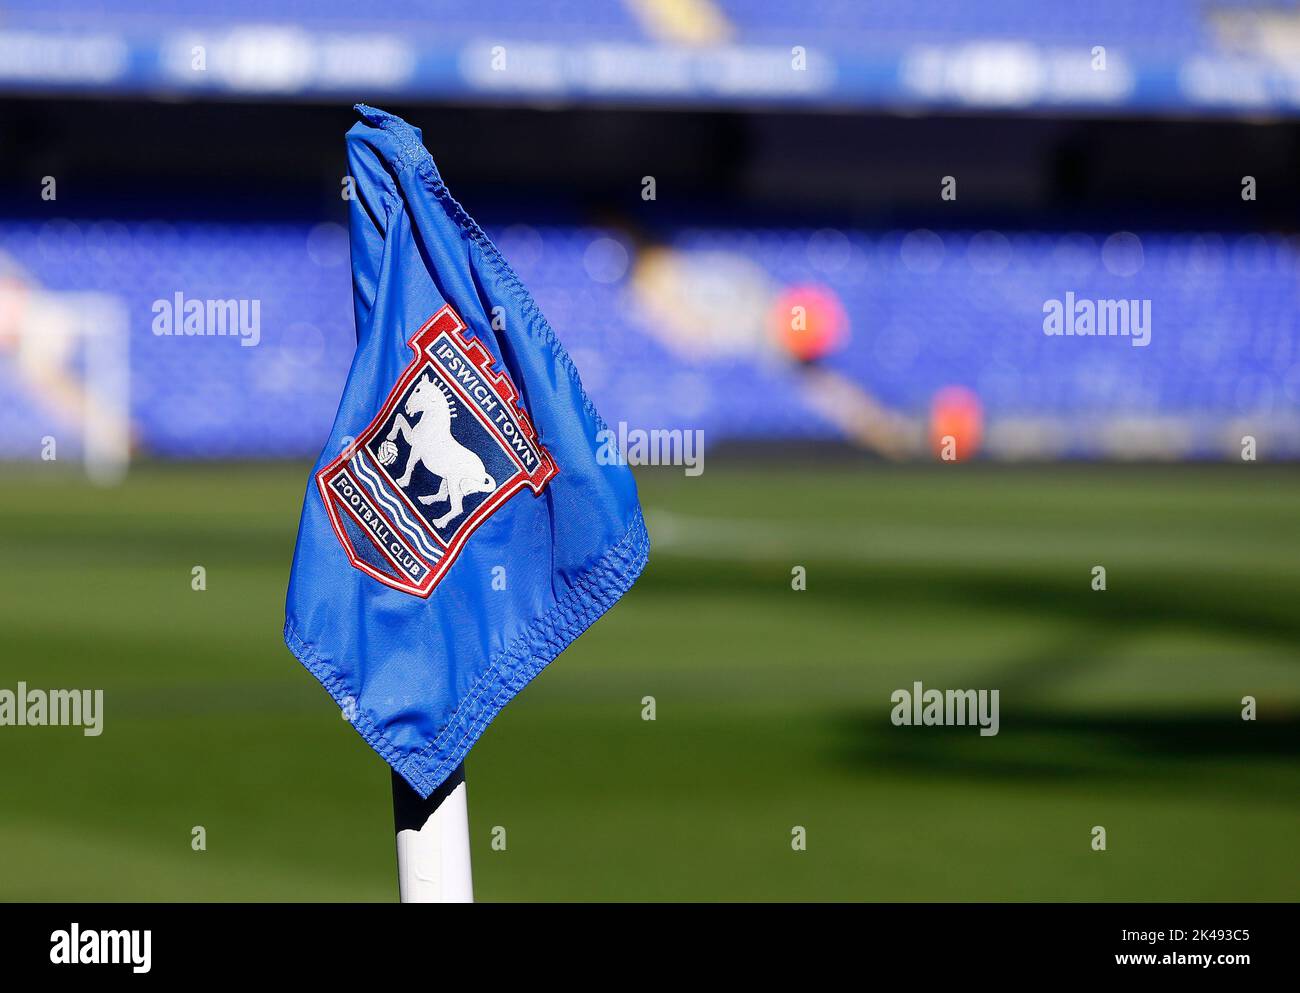 Ipswich, UK. 01st Oct, 2022. A general view of the ground before the Sky Bet League One match between Ipswich Town and Portsmouth at Portman Road on October 1st 2022 in Ipswich, England. (Photo by Mick Kearns/phcimages.com) Credit: PHC Images/Alamy Live News Stock Photo